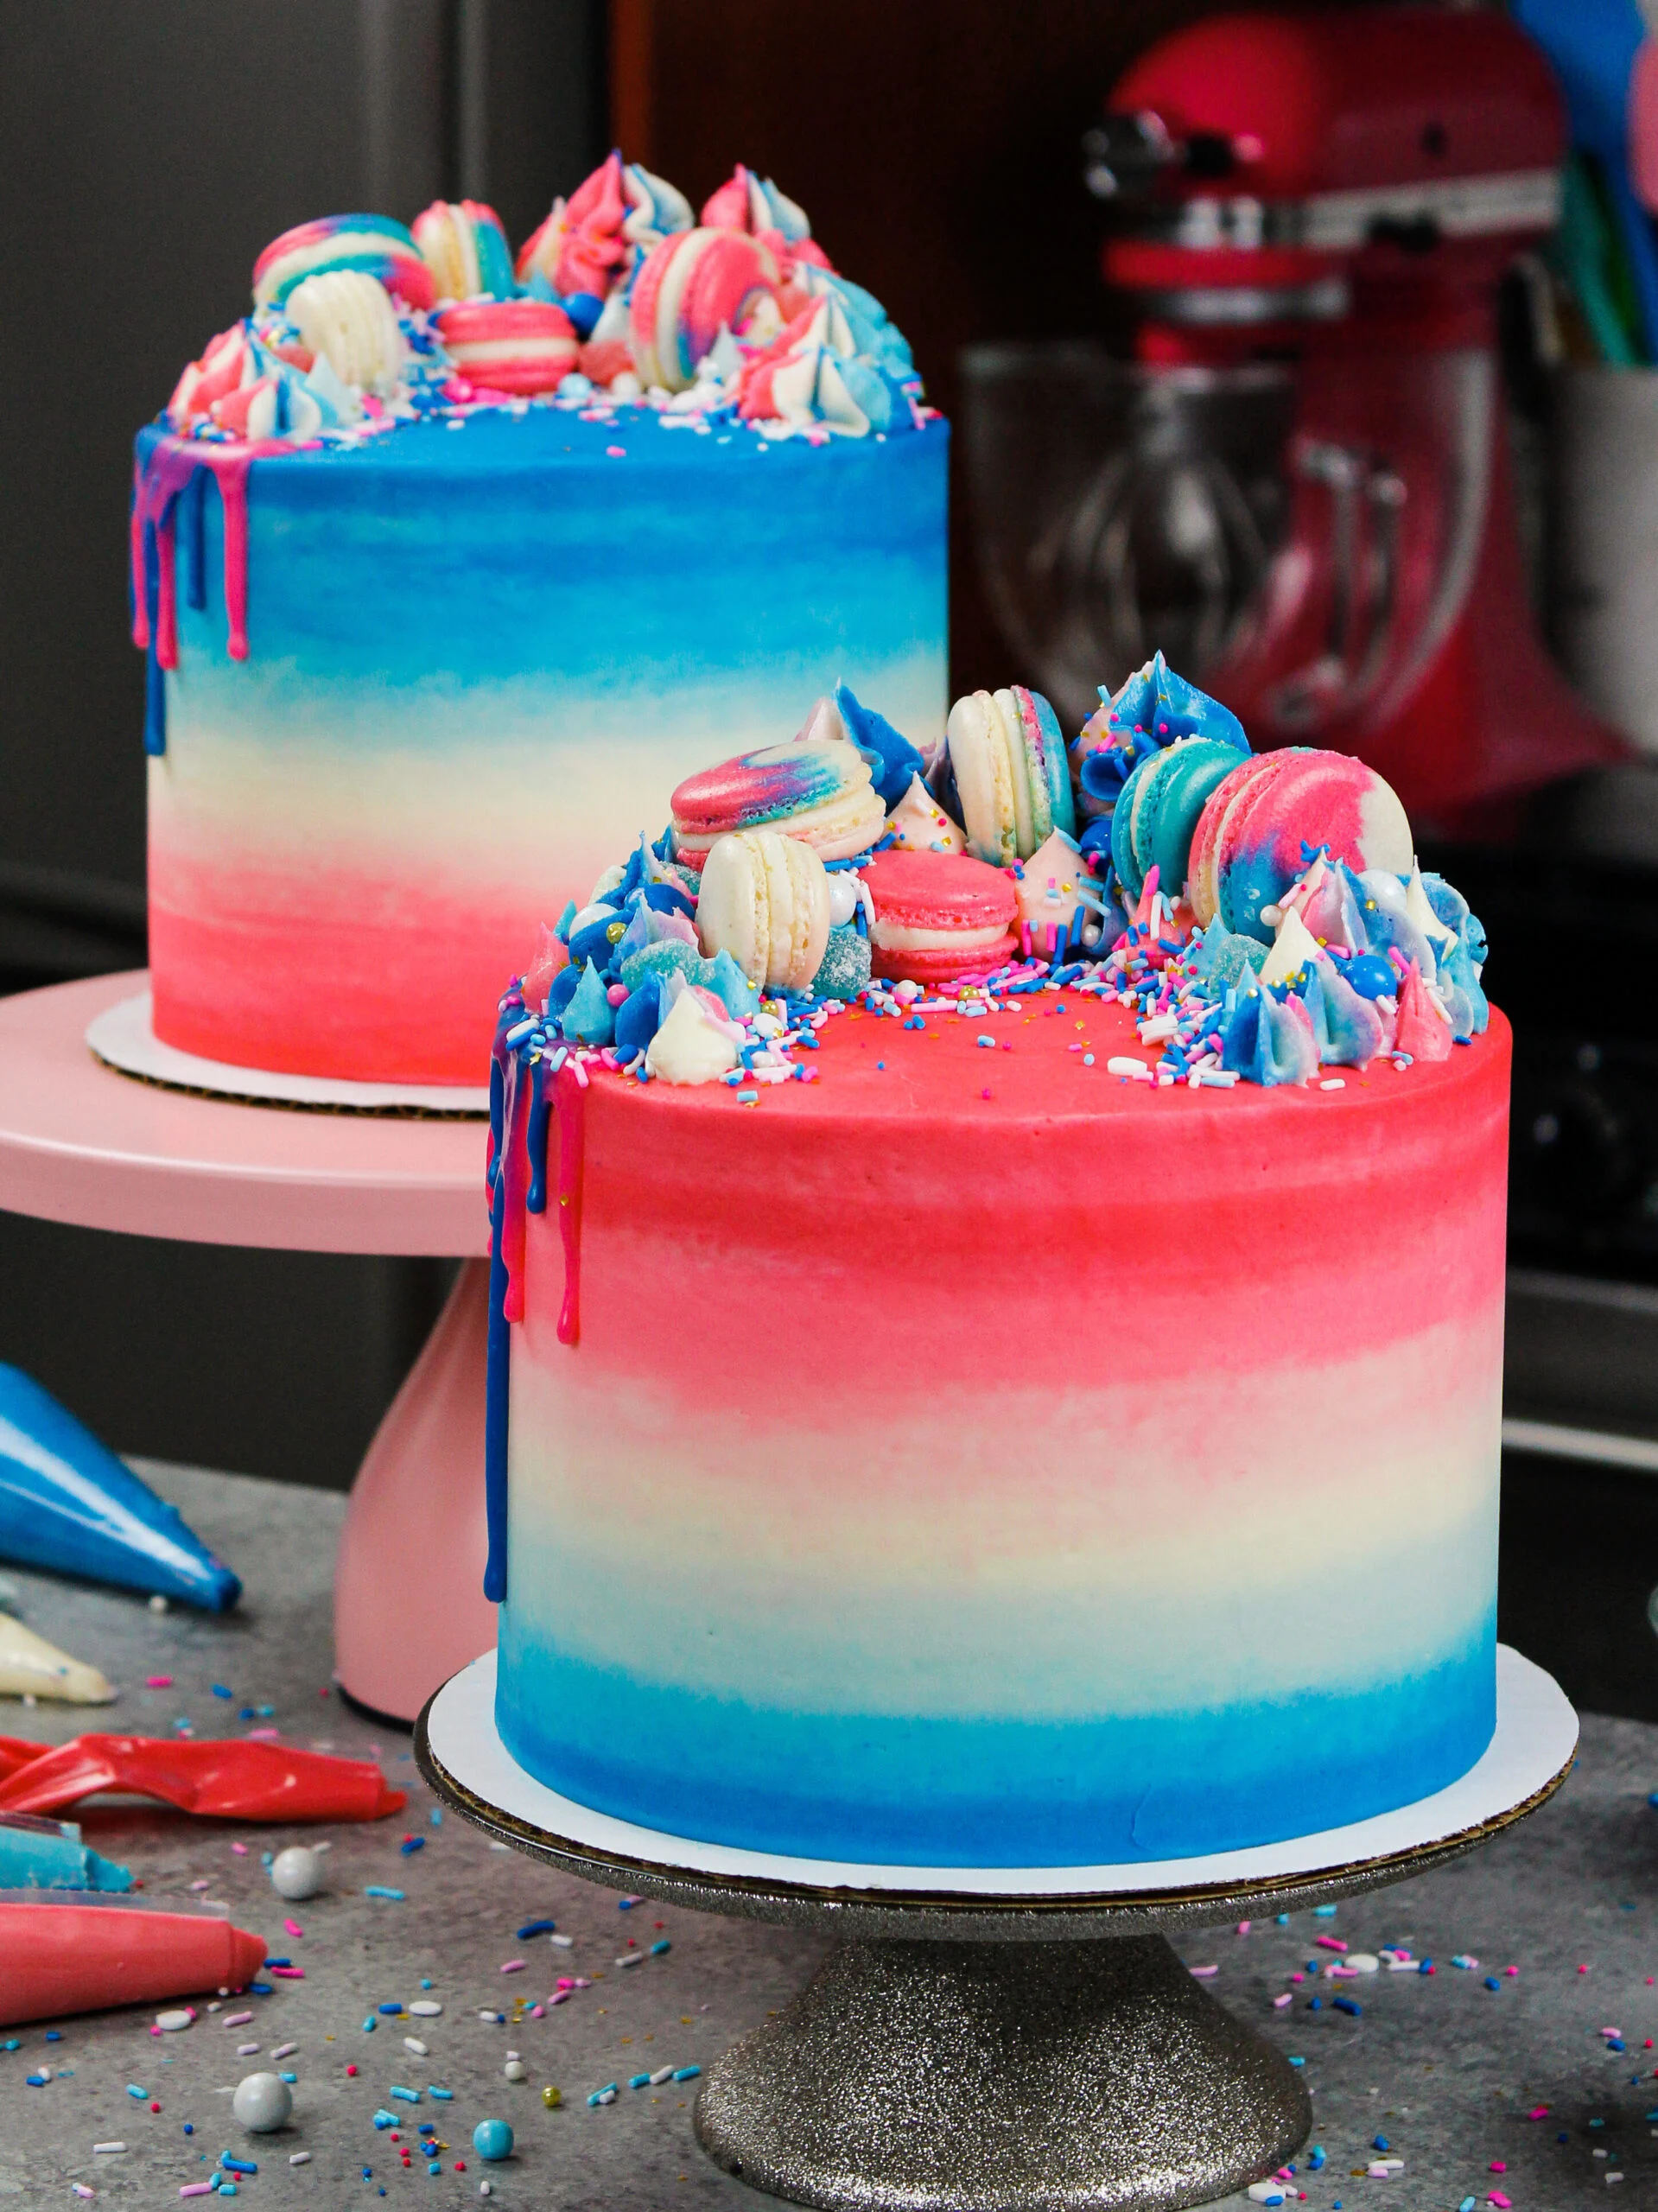 image of a pretty gender reveal cake decorate with blue and pink frosting and customized to celebrate either a boy or girl